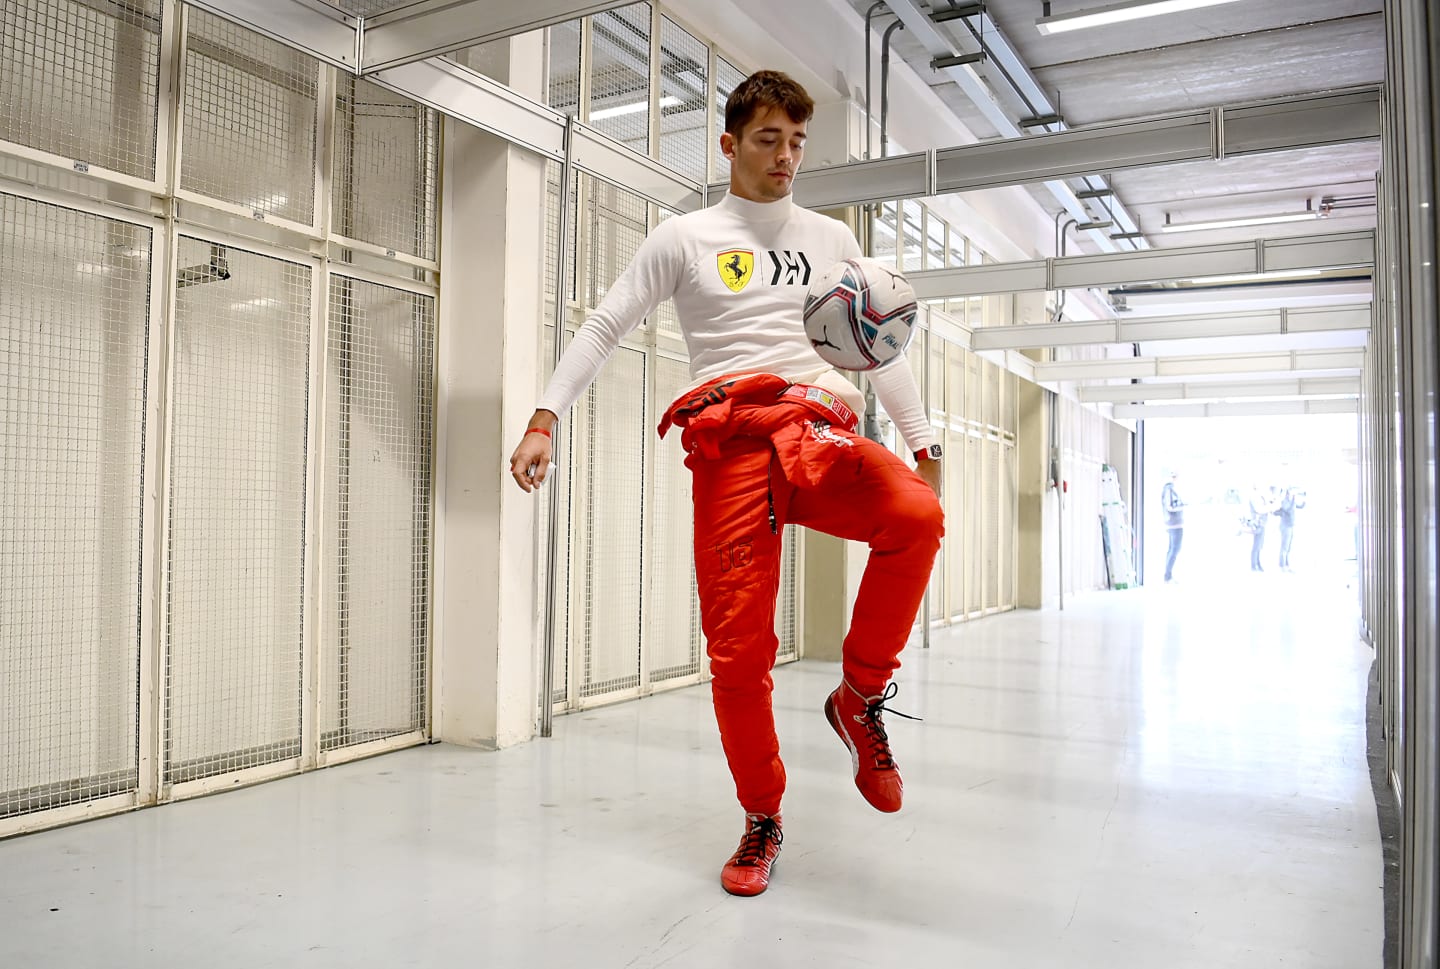 SAO PAULO, BRAZIL - NOVEMBER 12: Charles Leclerc of Monaco and Ferrari warms up by playing football during practice ahead of the F1 Grand Prix of Brazil at Autodromo Jose Carlos Pace on November 12, 2021 in Sao Paulo, Brazil. (Photo by Clive Mason - Formula 1/Formula 1 via Getty Images)